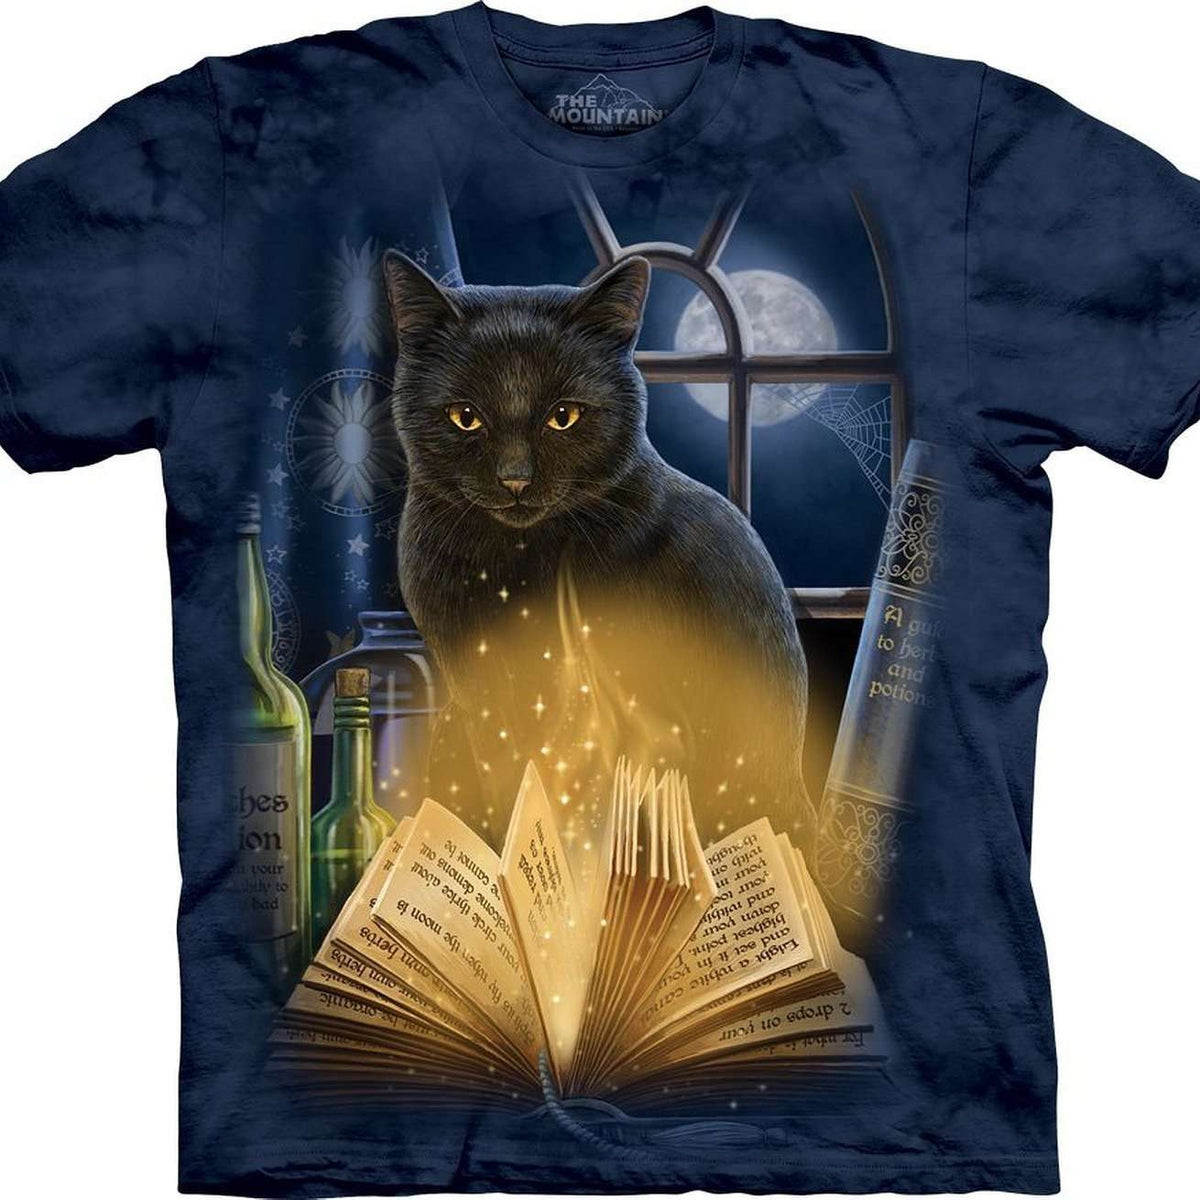 Designs by MyUtopia Shout Out:Bewitched Black Cat Wizardy Magical Spellbook By The Mountain Tee Shirt,Short Sleeve / Small / Blue,Adult Unisex T-Shirt